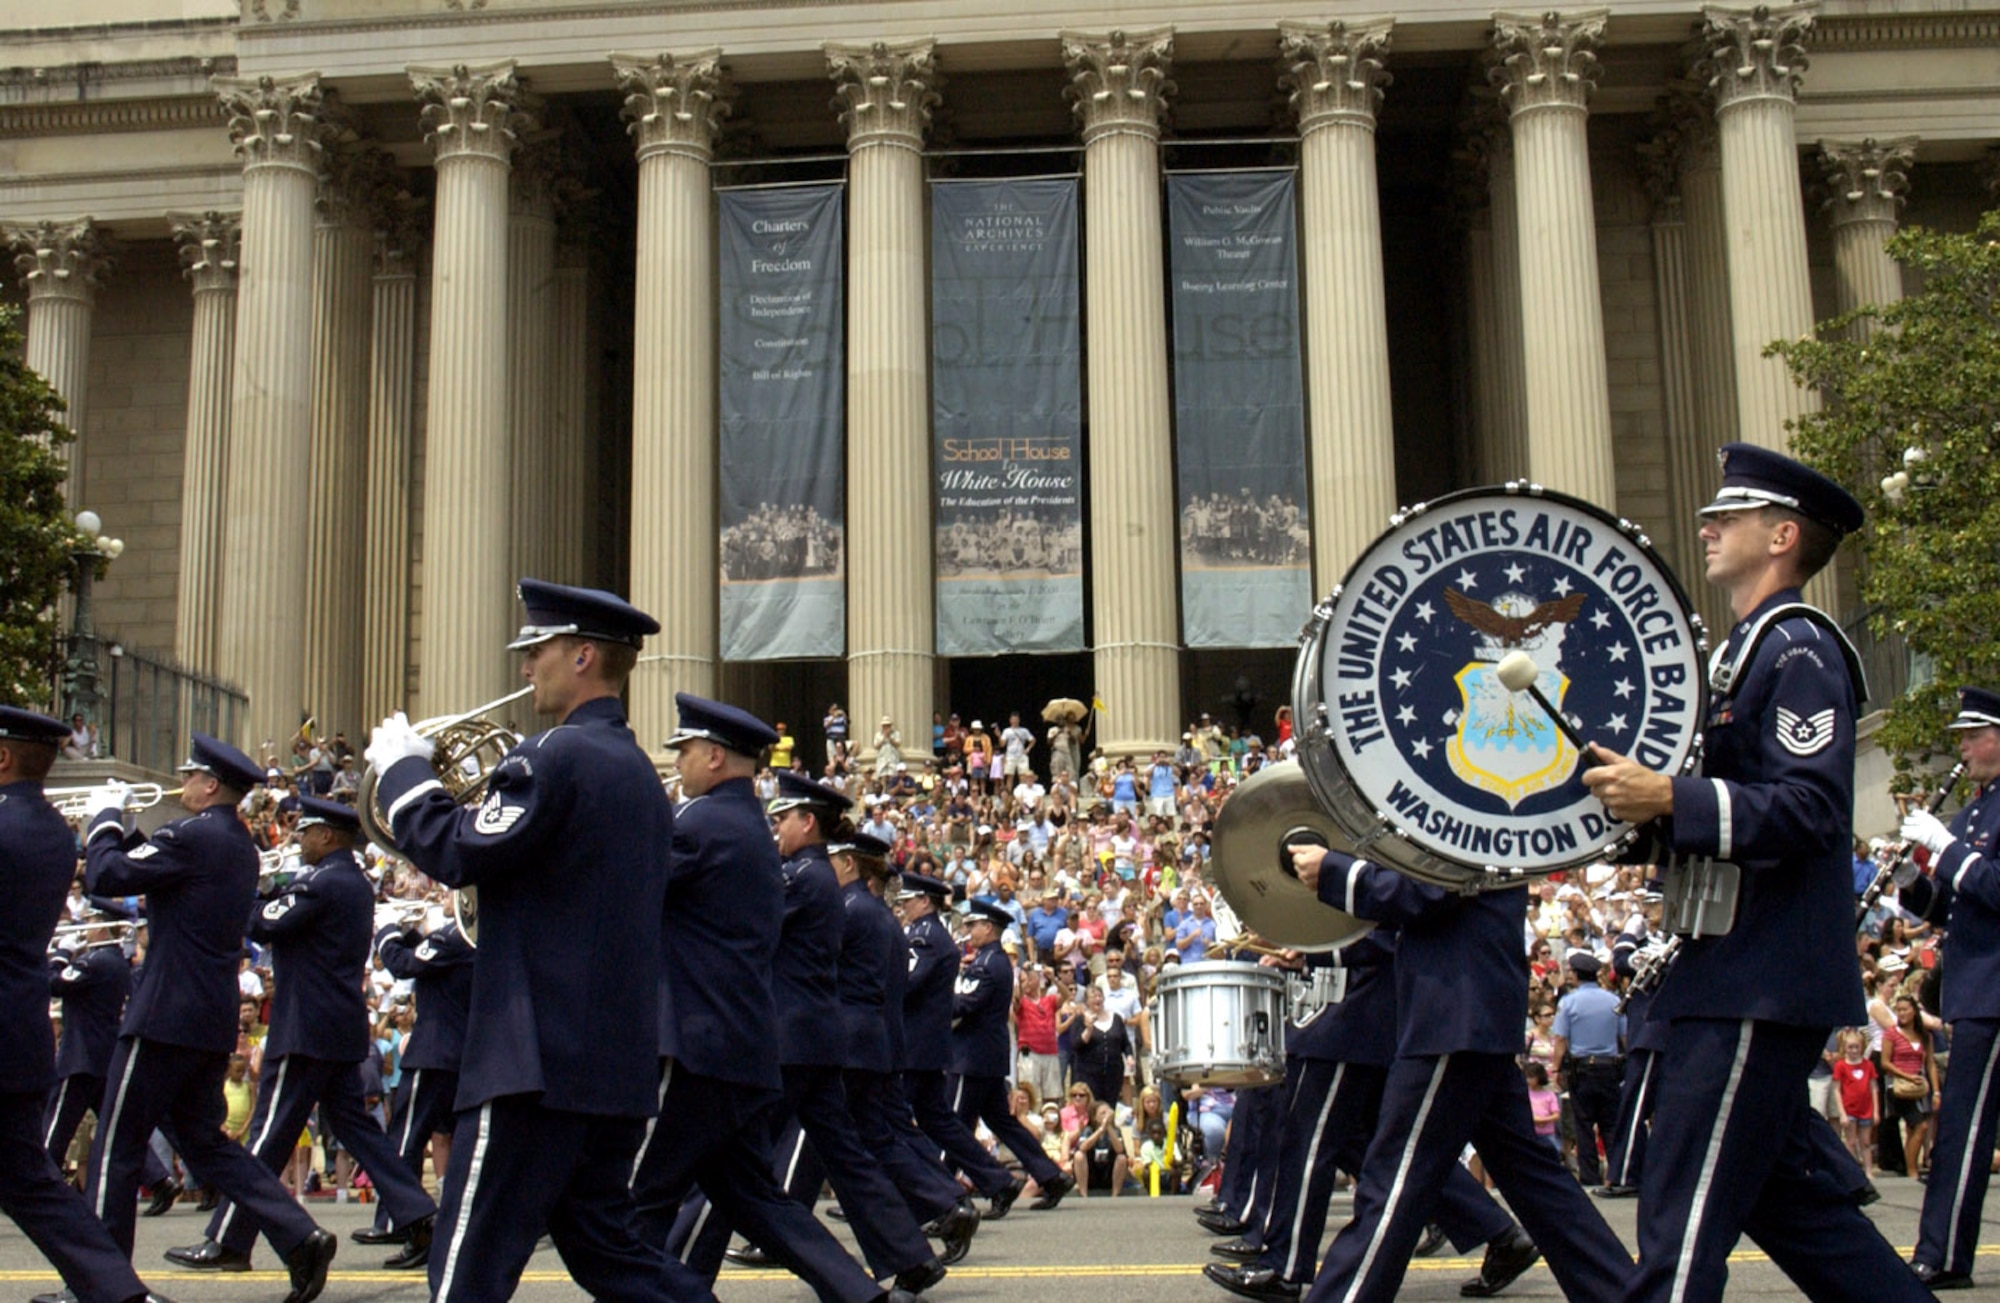 Airmen from the Air Force Band march in front of the National Archives during the National Memorial Day Parade May 28, 2013, in Washington, D.C. The parade highlighted the Air Force's 60th anniversary as a separate service. 